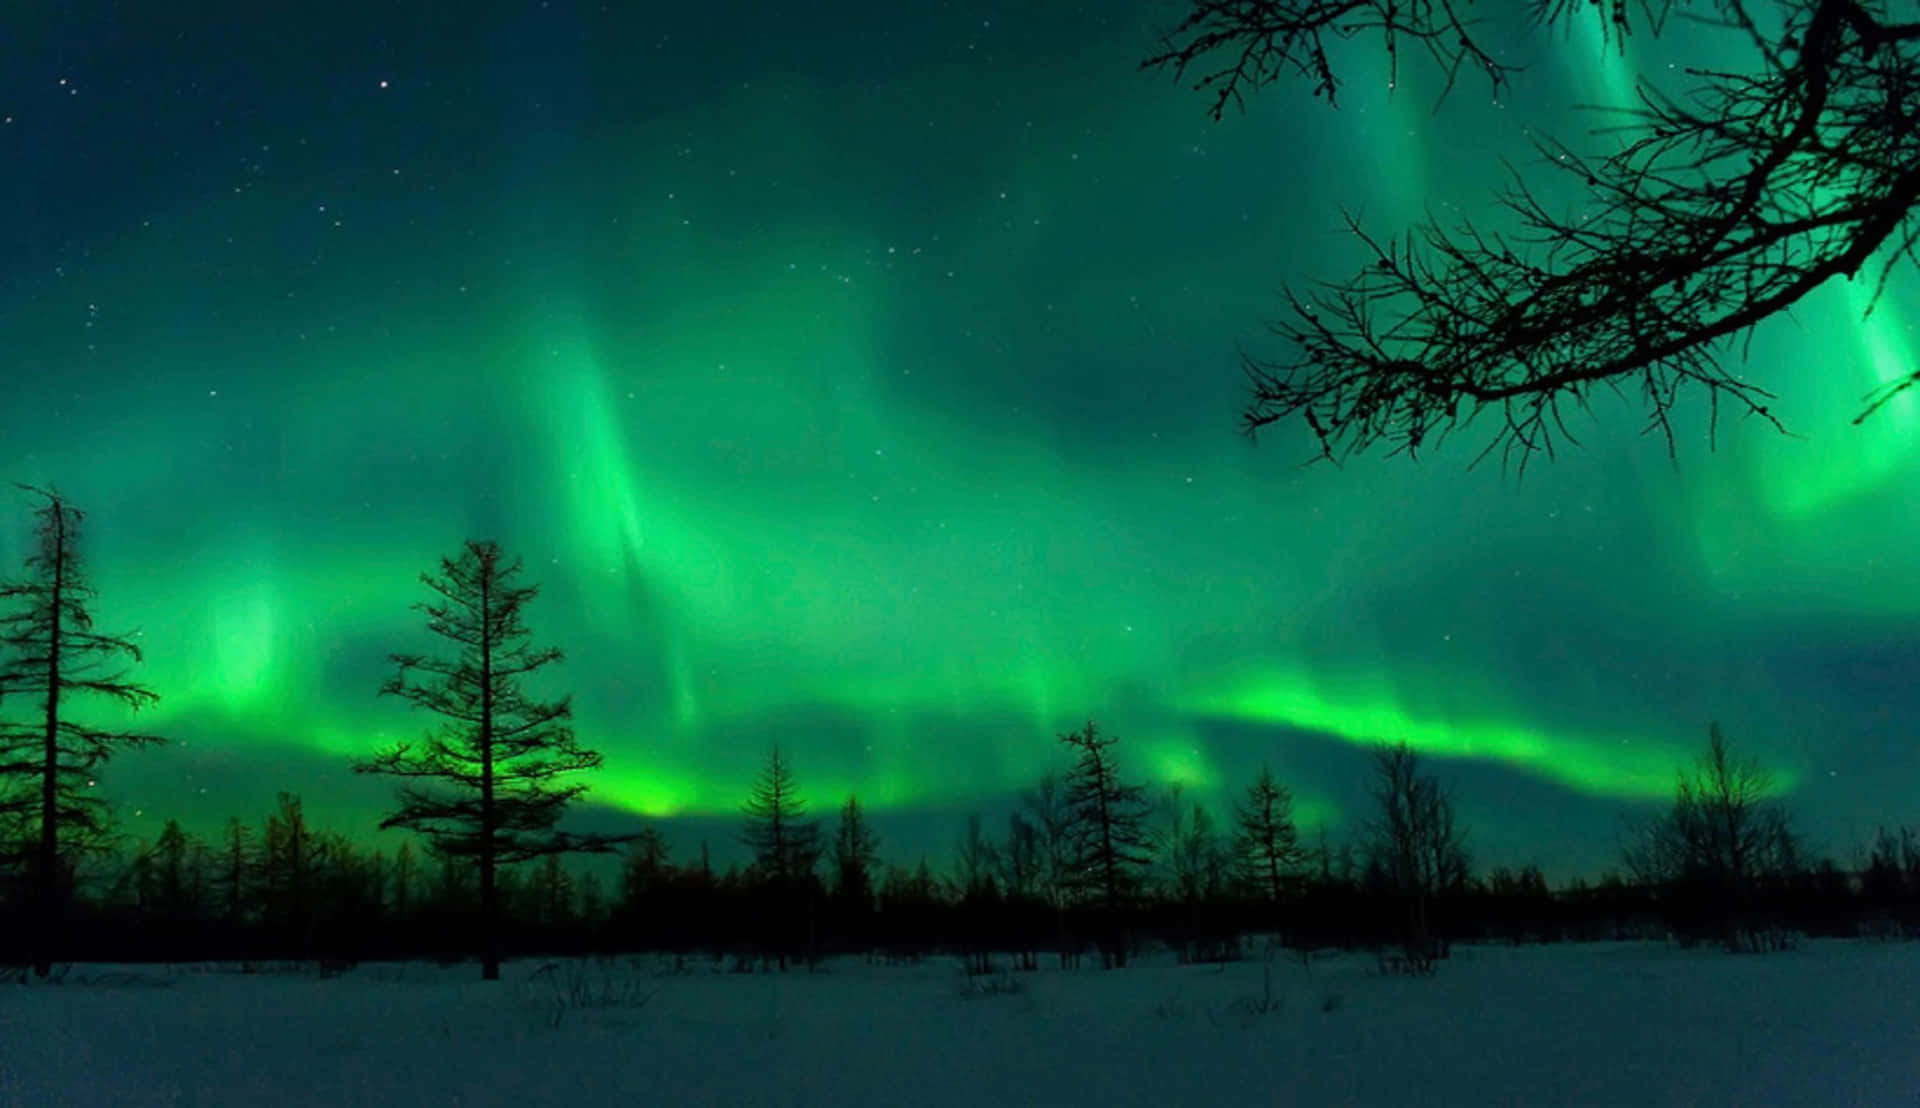 A Spectacular Show of Color as the Northern Lights Illuminate the Night Sky